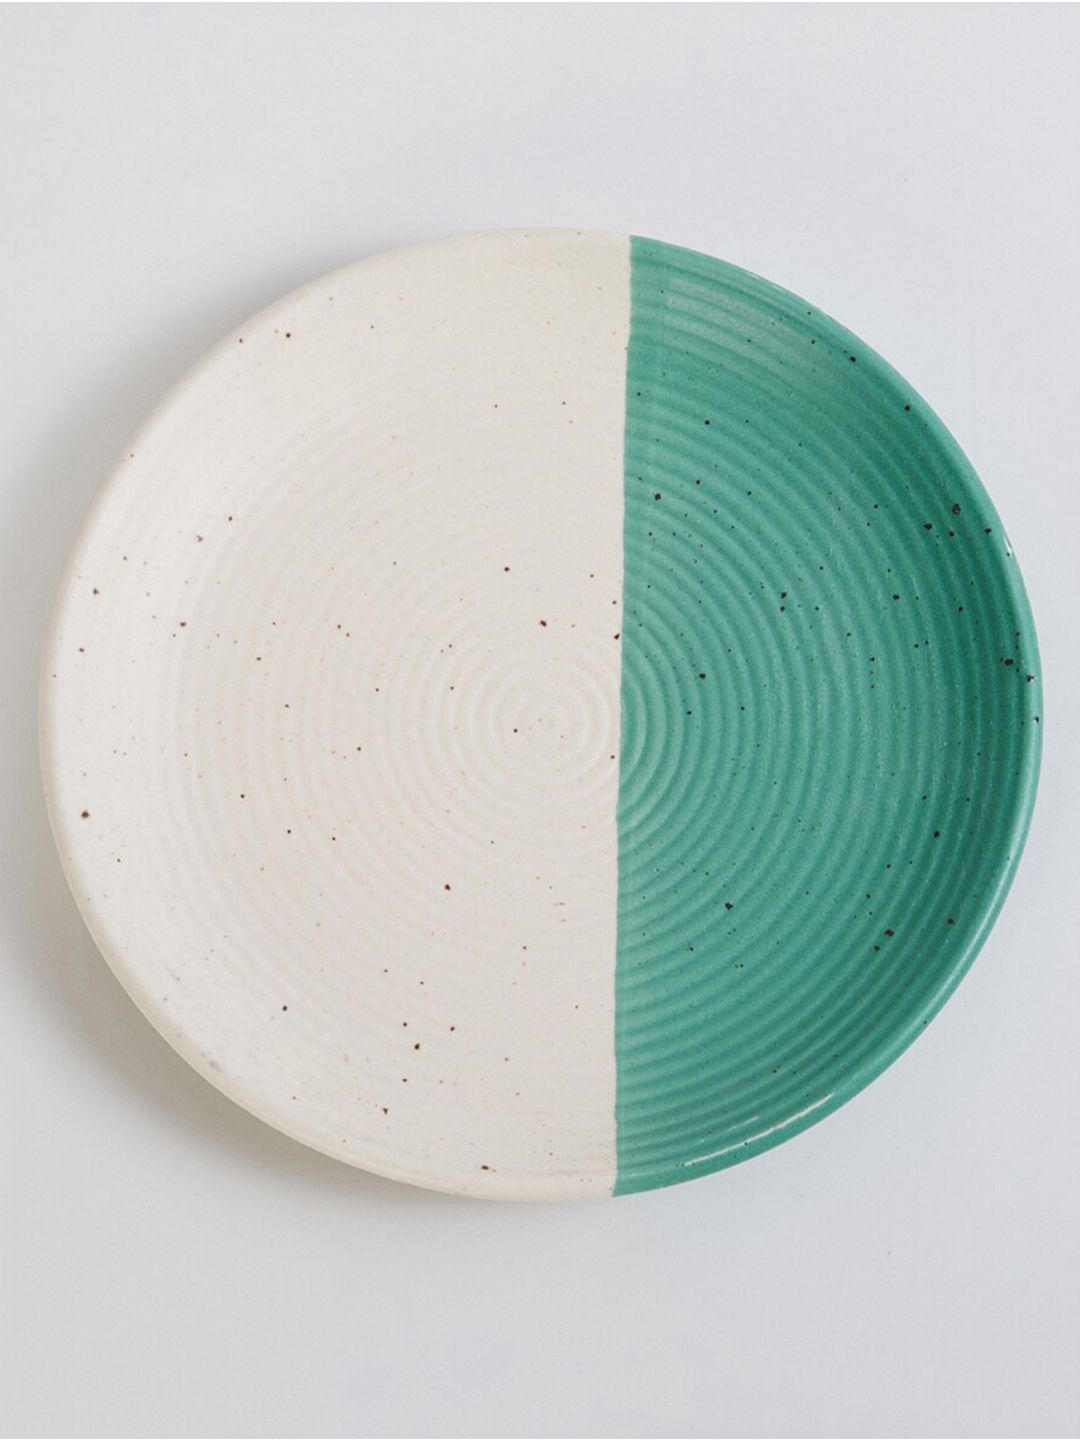 Home Centre Teal & White 1 Pieces Printed Ceramic Glossy Stoneware Plate Price in India